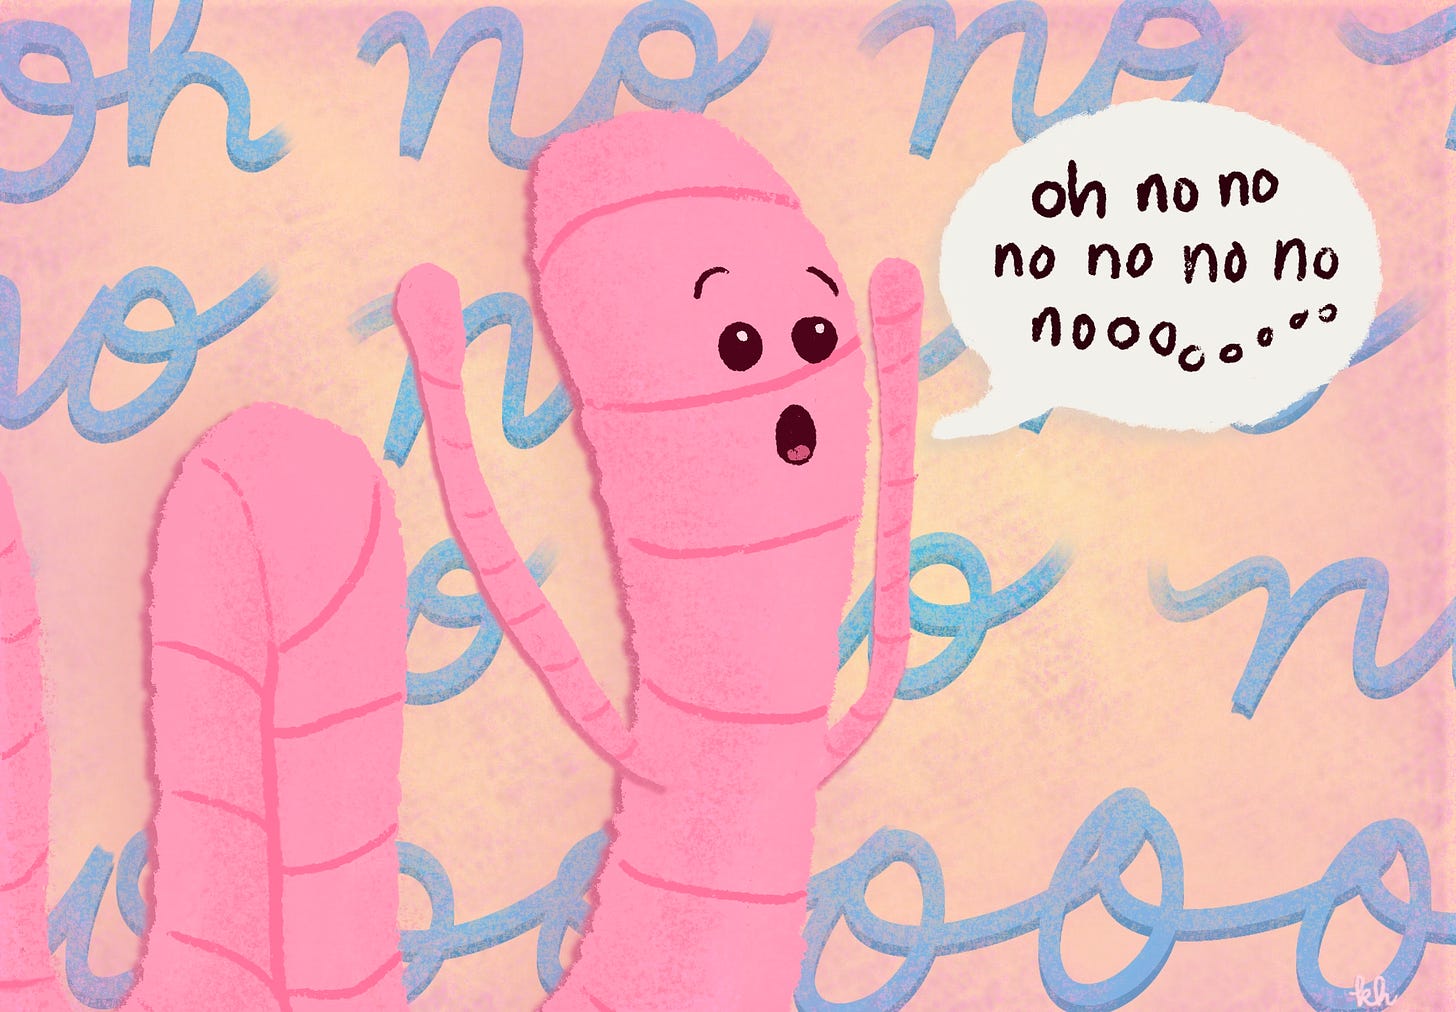 Illustration of an alarmed-looking pink worm. A speech bubble exiting the worm's mouth says "Oh no no no no noooooooo." Text in the background says the same. The worm has arms for some reason.